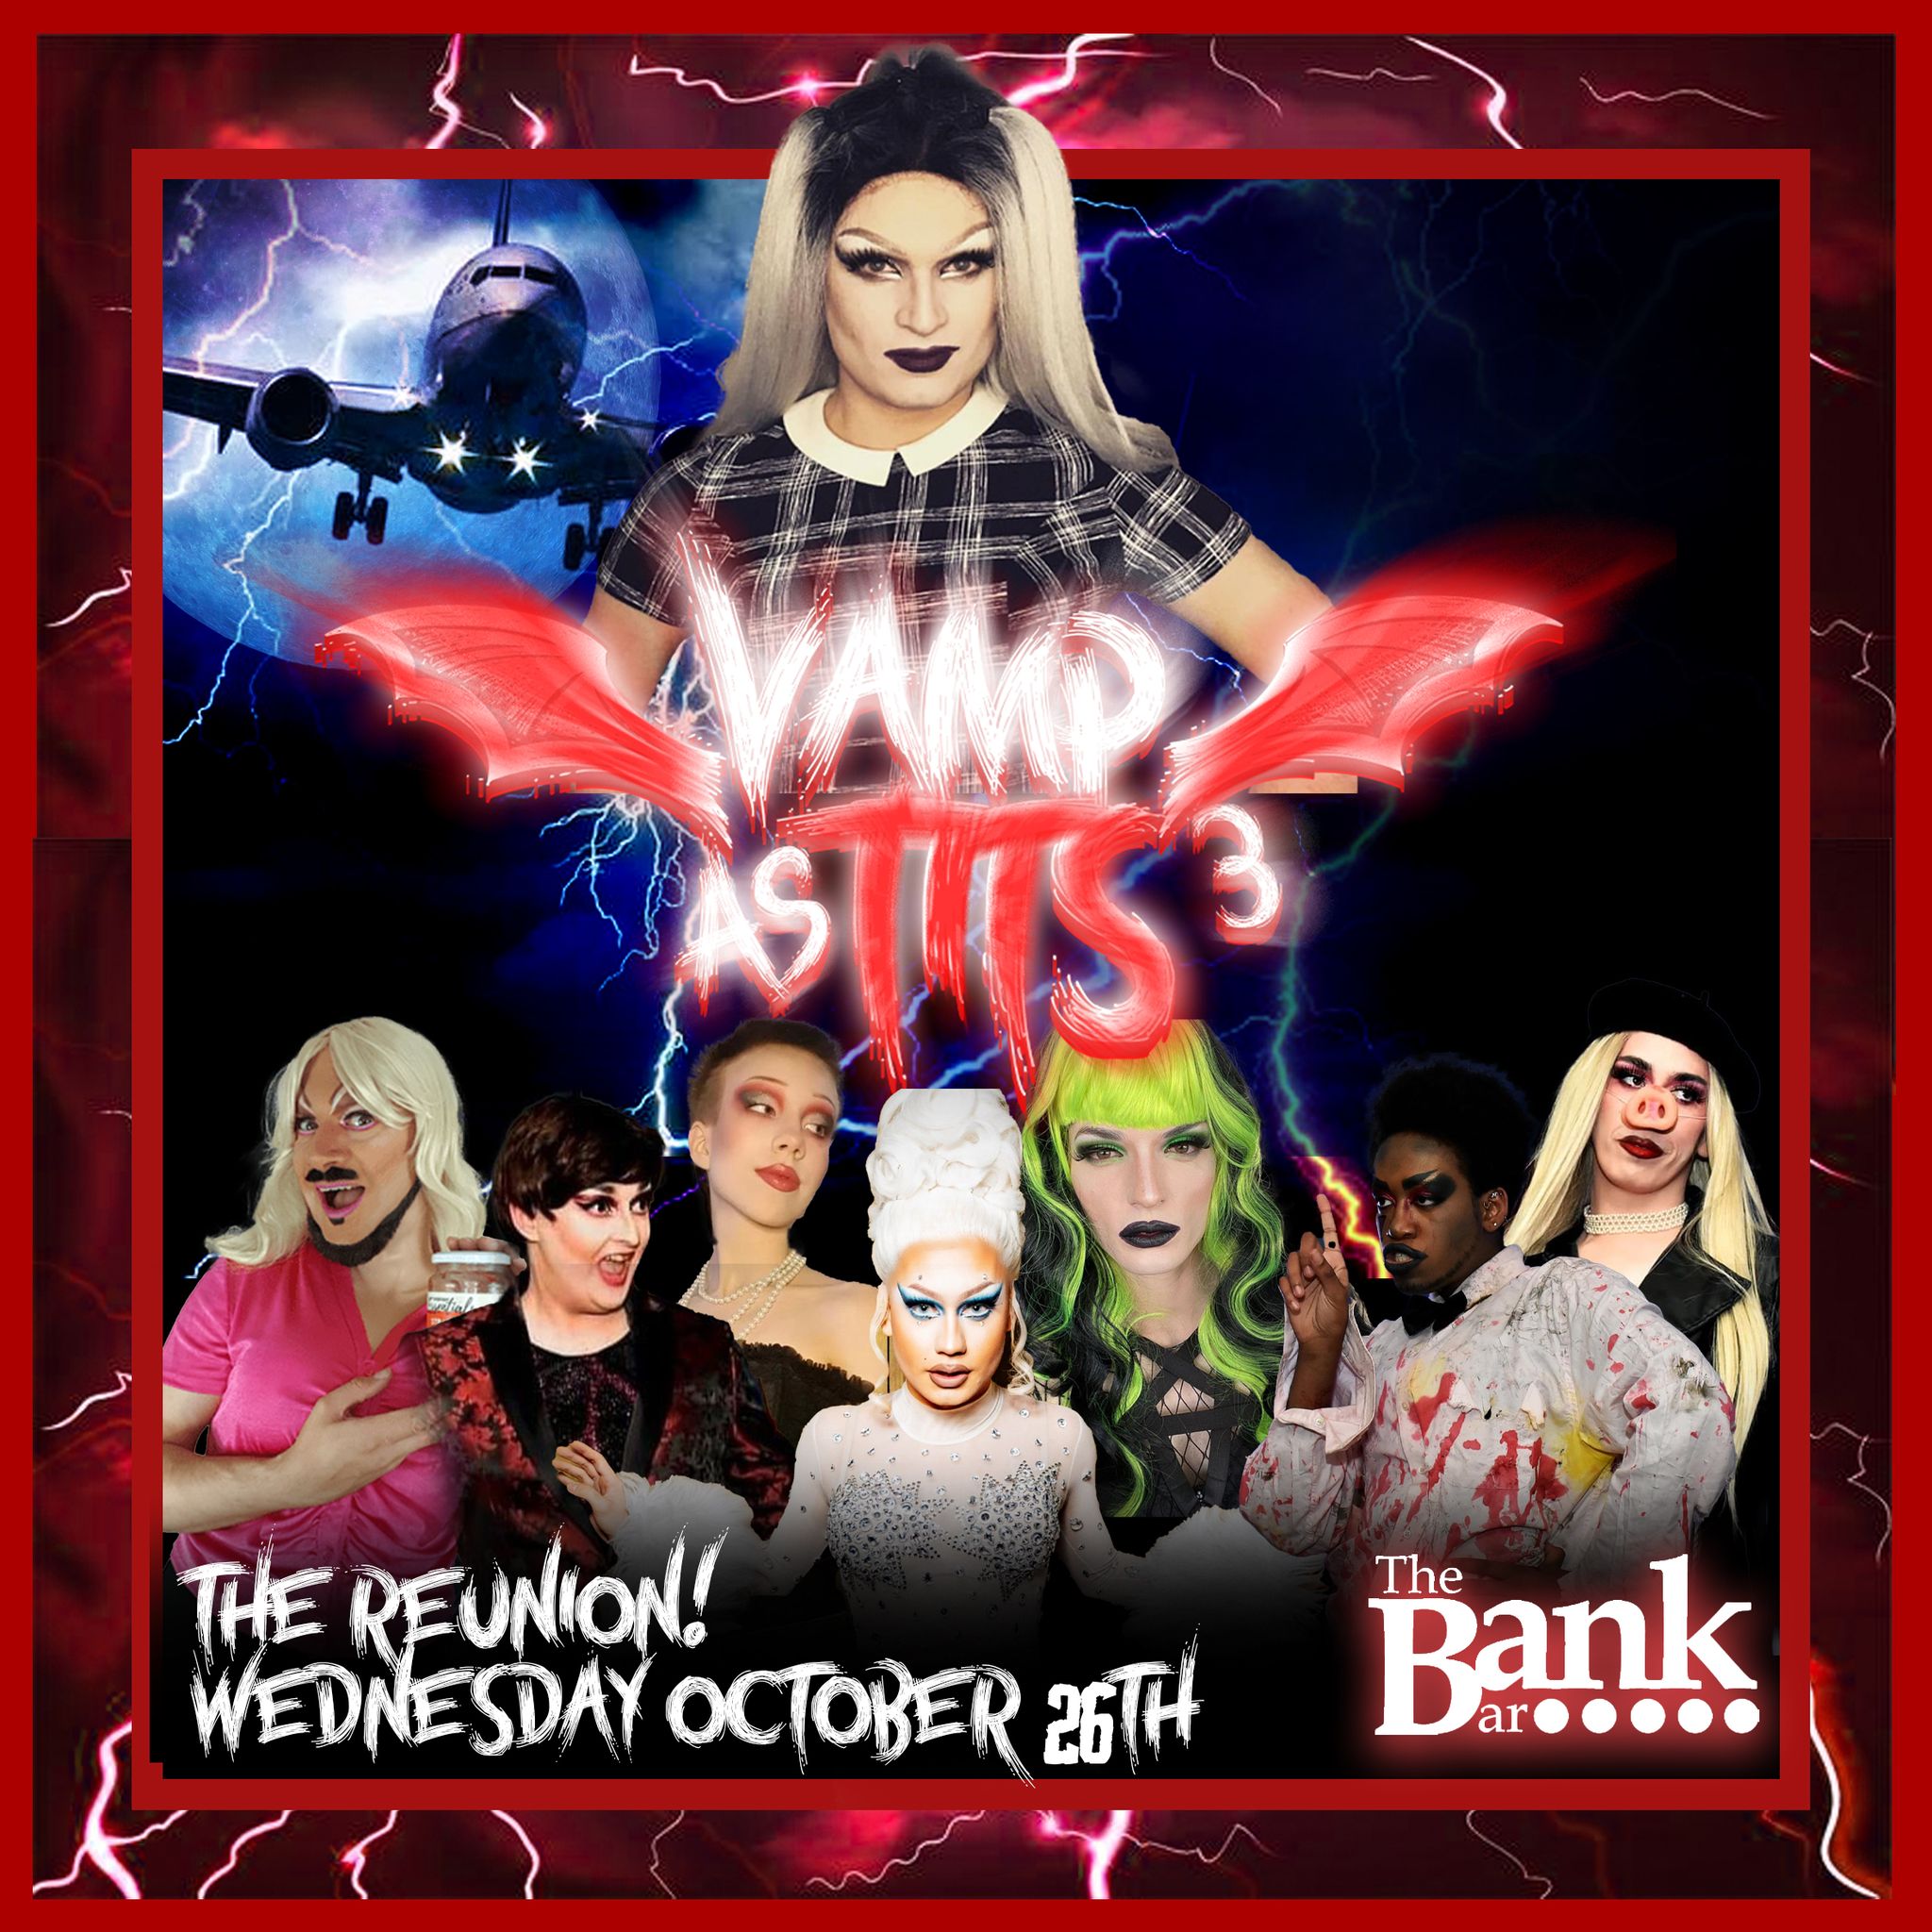 Poster for Vamp As Tits 3 - The Reunion